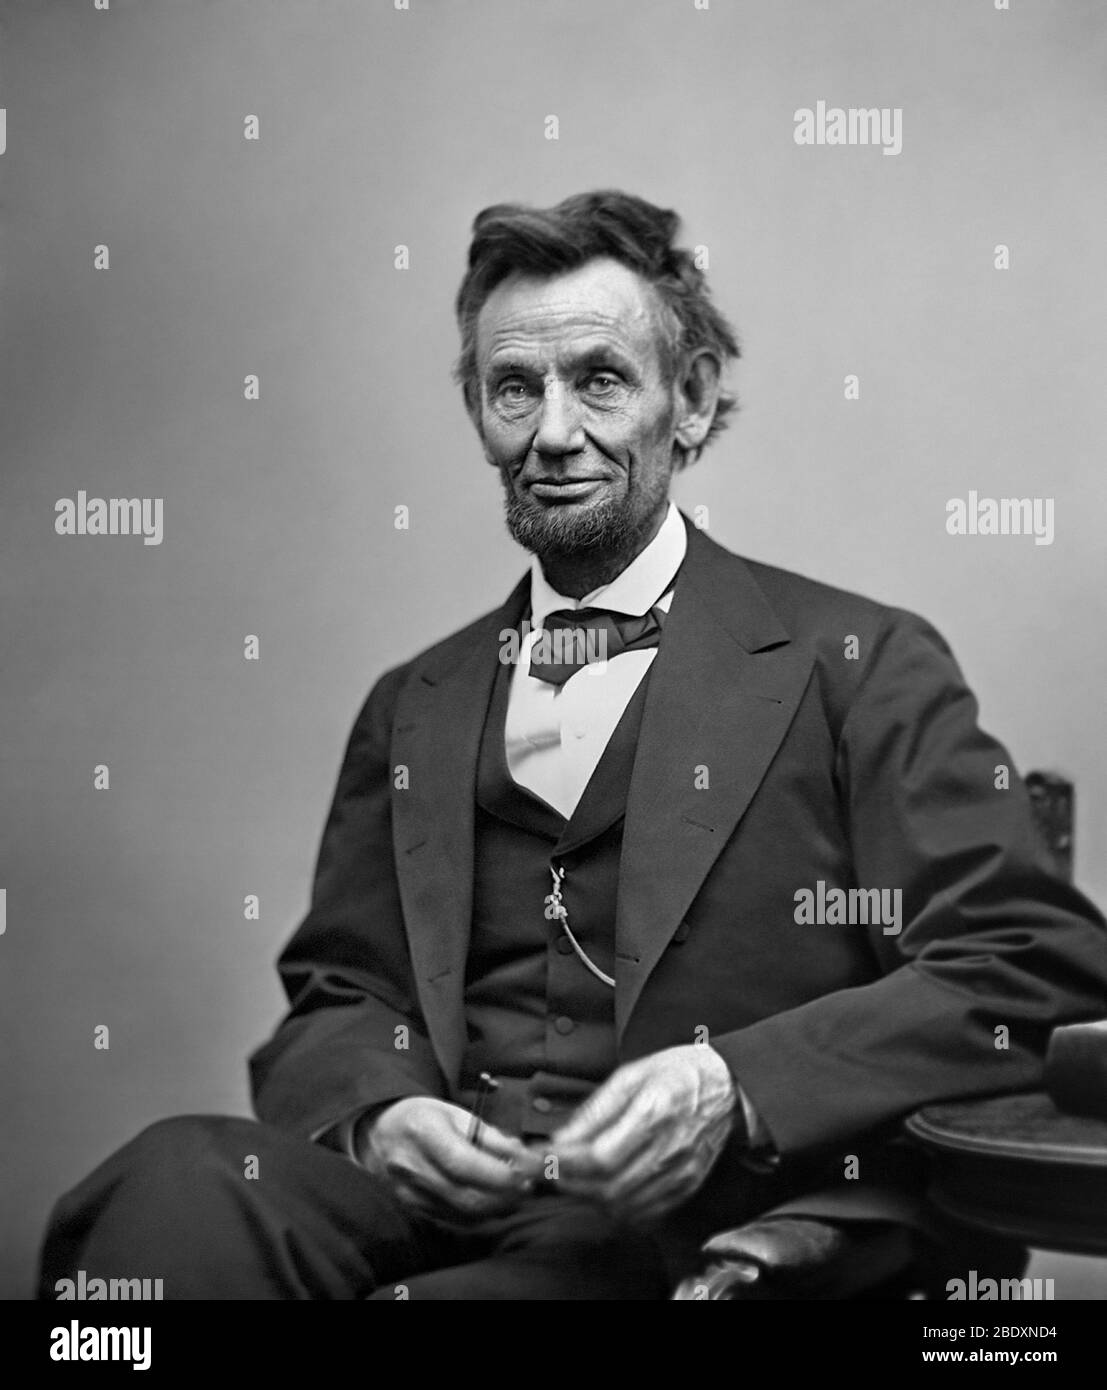 Abraham Lincoln Smiling, 1865 Stock Photo